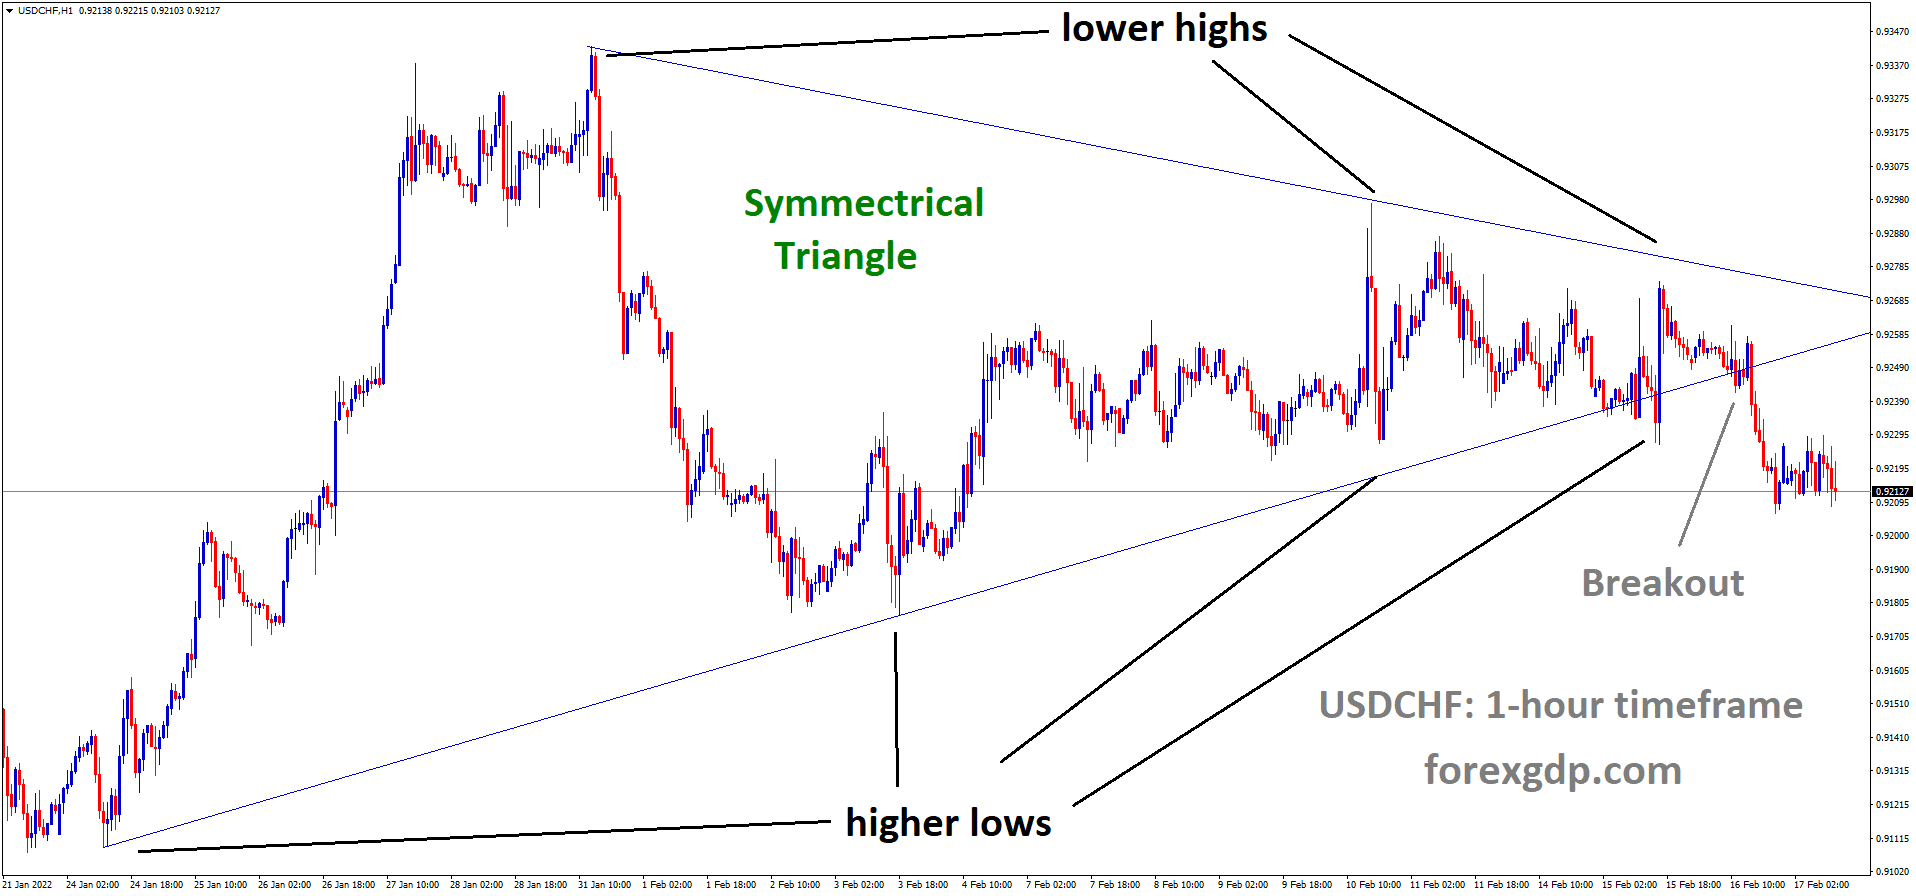 USDCHF has broken the Symmetrical triangle pattern